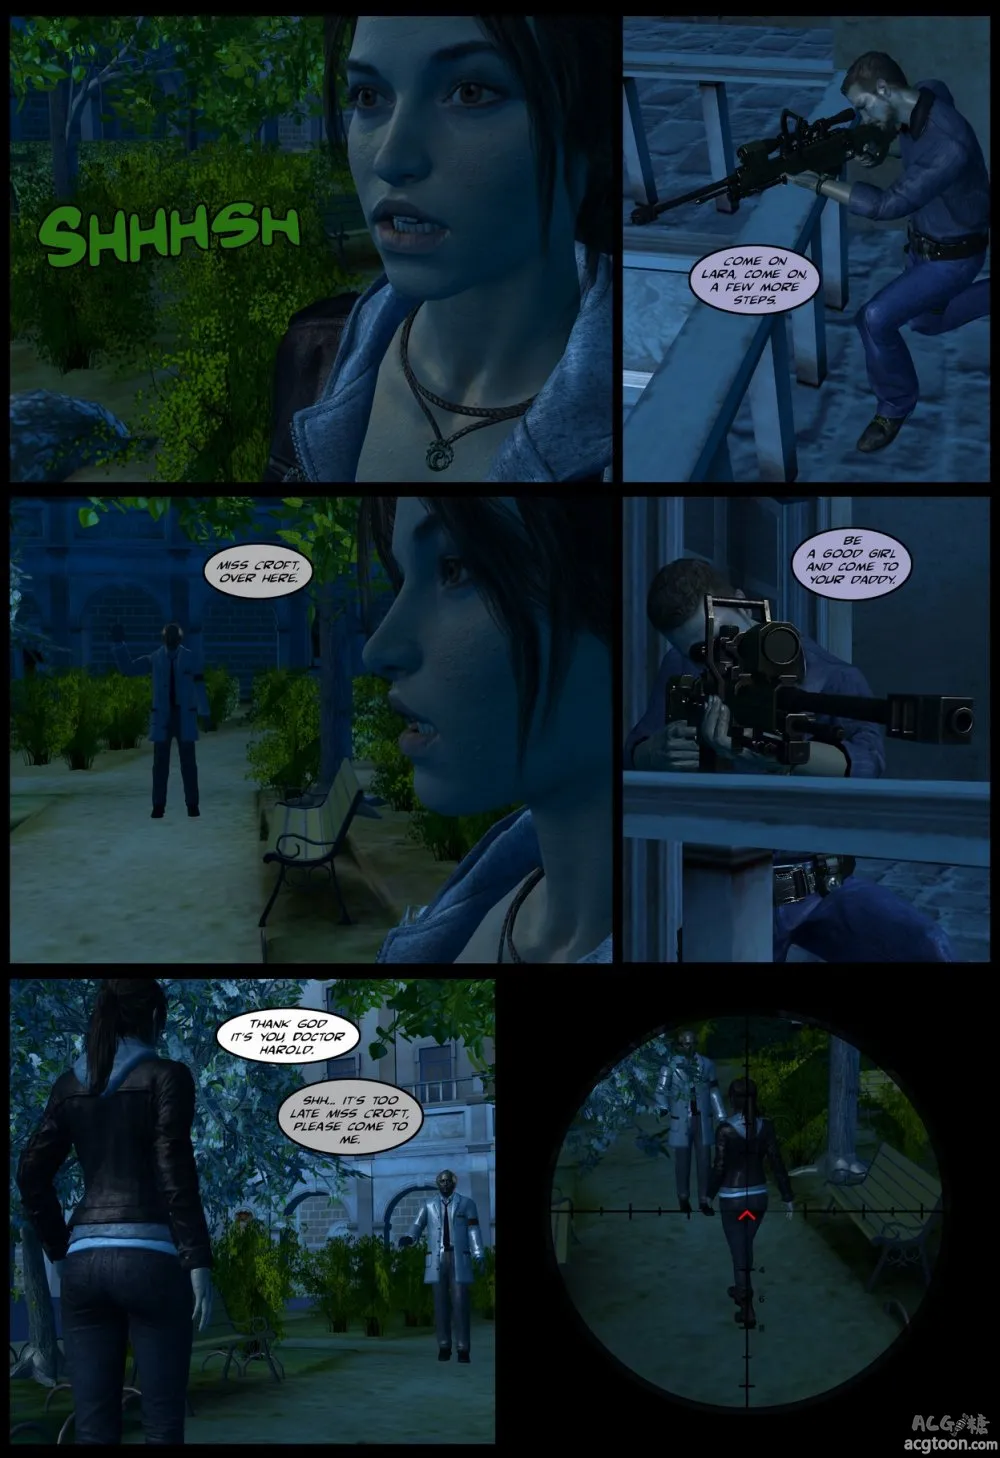 Hostel of Sodom 3: Welcome to hostel - Page 30